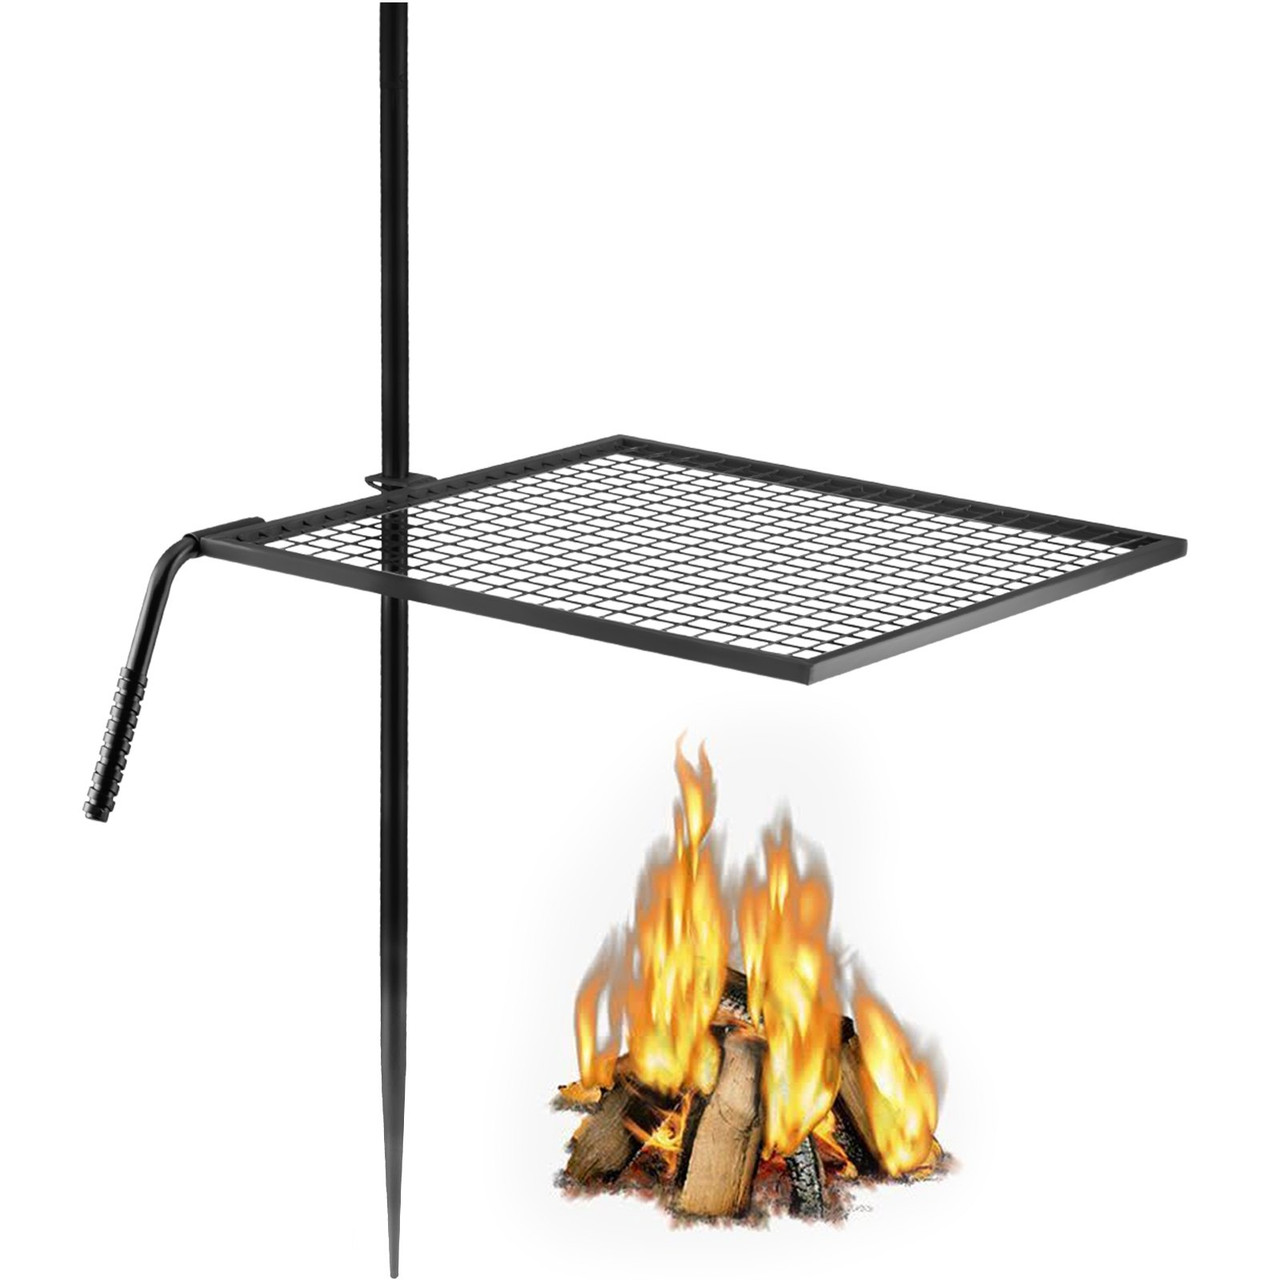 Swivel Grill, Heavy Duty Steel Campfire Grill,Single Layer Open Fire Grill, 24" x 24" Campfire Swivel Grill with Heat Dissipation Handle, Campfire Grill Stake for Outdoor Open Flame Cooking